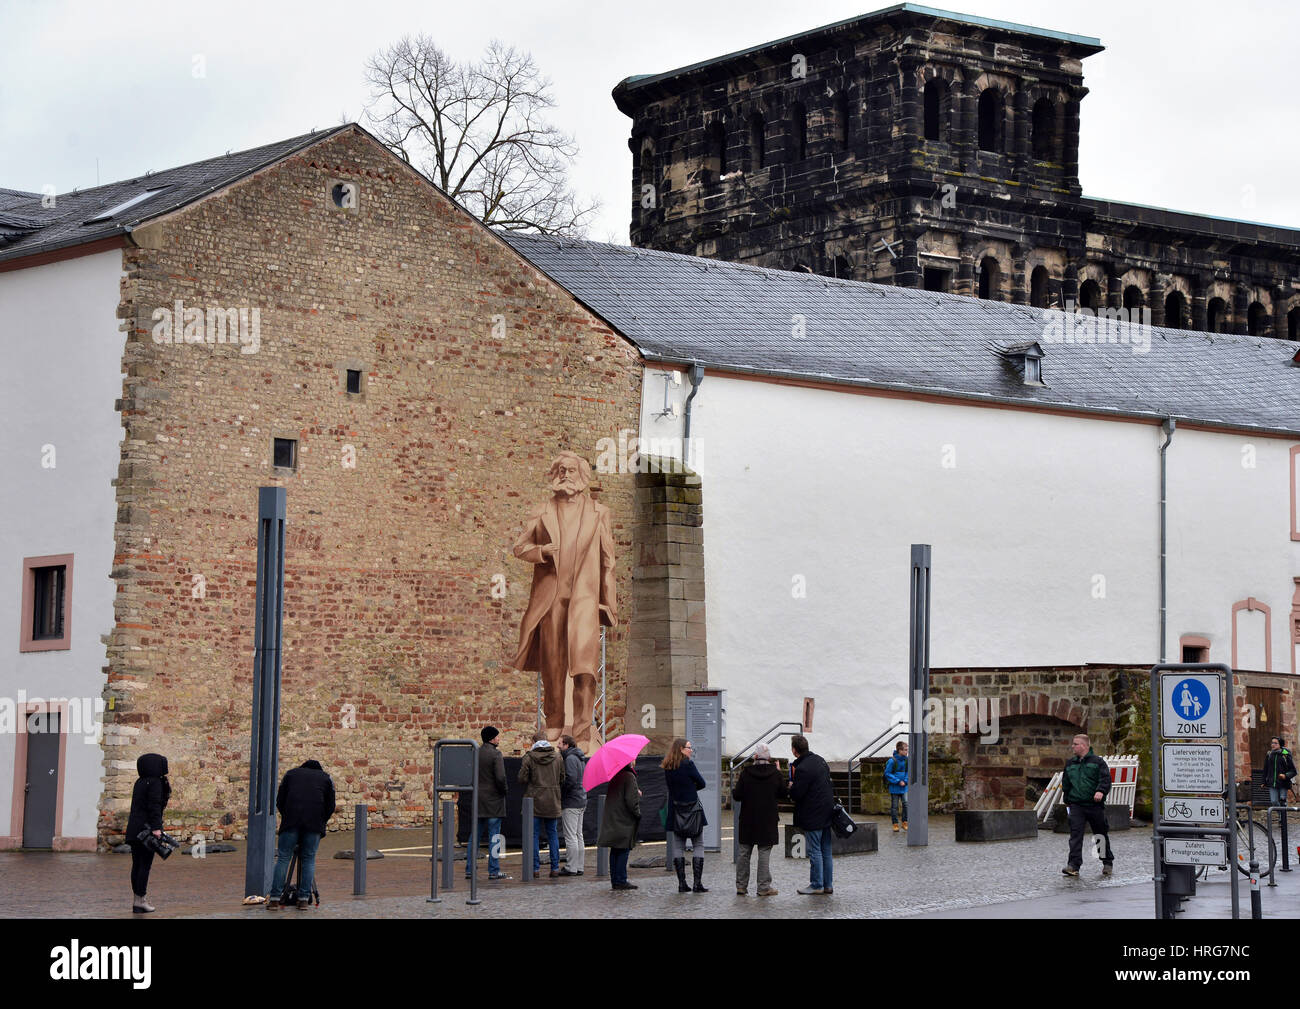 Trier, Germany. 01st Mar, 2017. A wooden cut out of the planned Karl Marx statue, which is to be 6.30 meters high, can be seen in Trier, Germany, 01 March 2017. The People's Republic of China wants to give Trier, the birthplace of Karl Marx, a 'Giant Marx' for his 200th birthday in 2018. Due to its size and the location near the Porta Nigra, it has already triggered criticism so the city wants to give people an impression first with the dummy statue. Photo: Harald Tittel/dpa/Alamy Live News Stock Photo